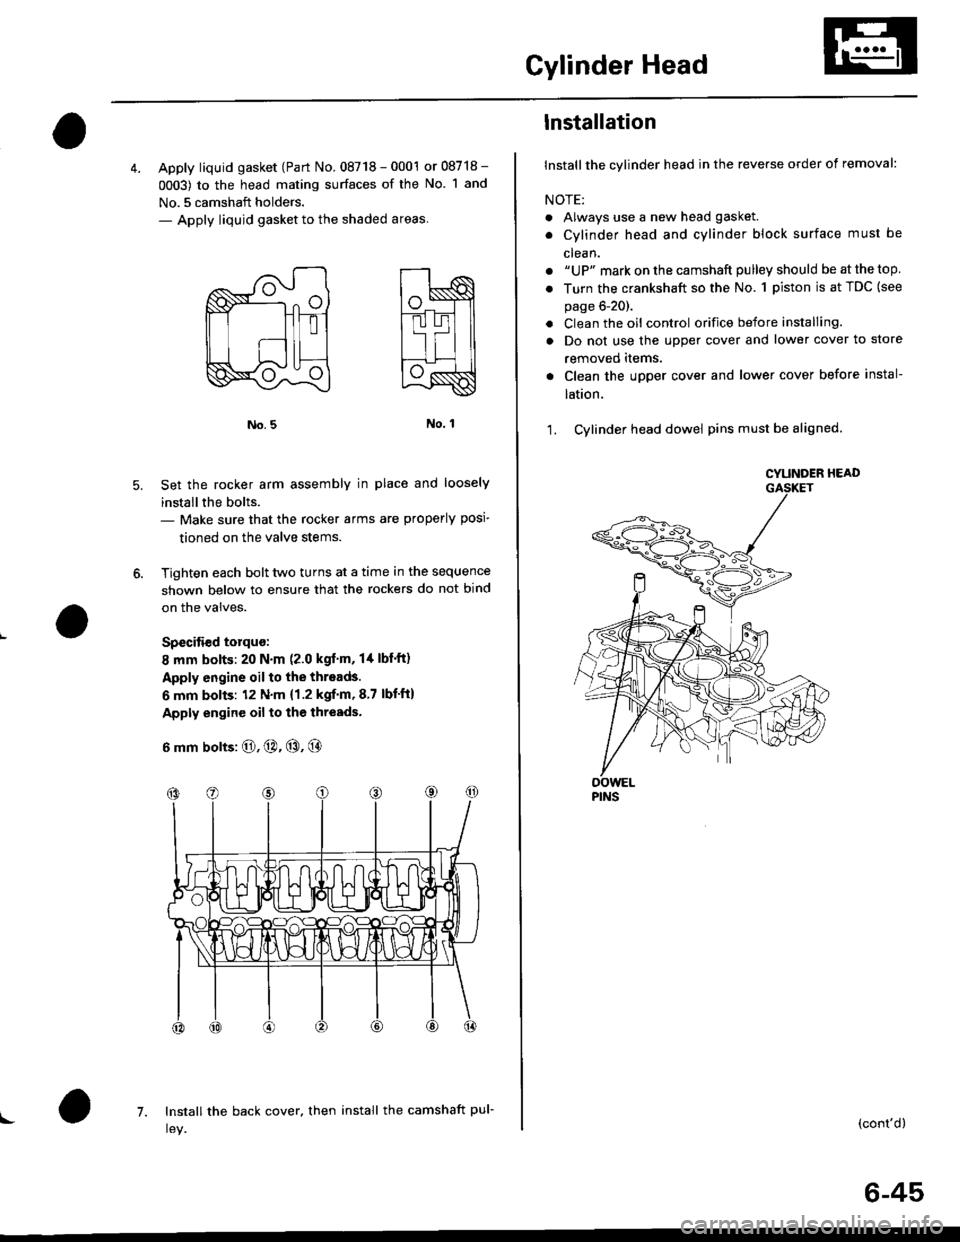 HONDA CIVIC 1998 6.G Owners Guide Cylinder Head
4. Apply liquid gasket (Part No. 08718 - 0001 or 08718 -
0003) to the head mating surfaces of the No. 1 and
No.5 camshaft holders.- Apply liquid gasket to the shaded areas
Set the rocker